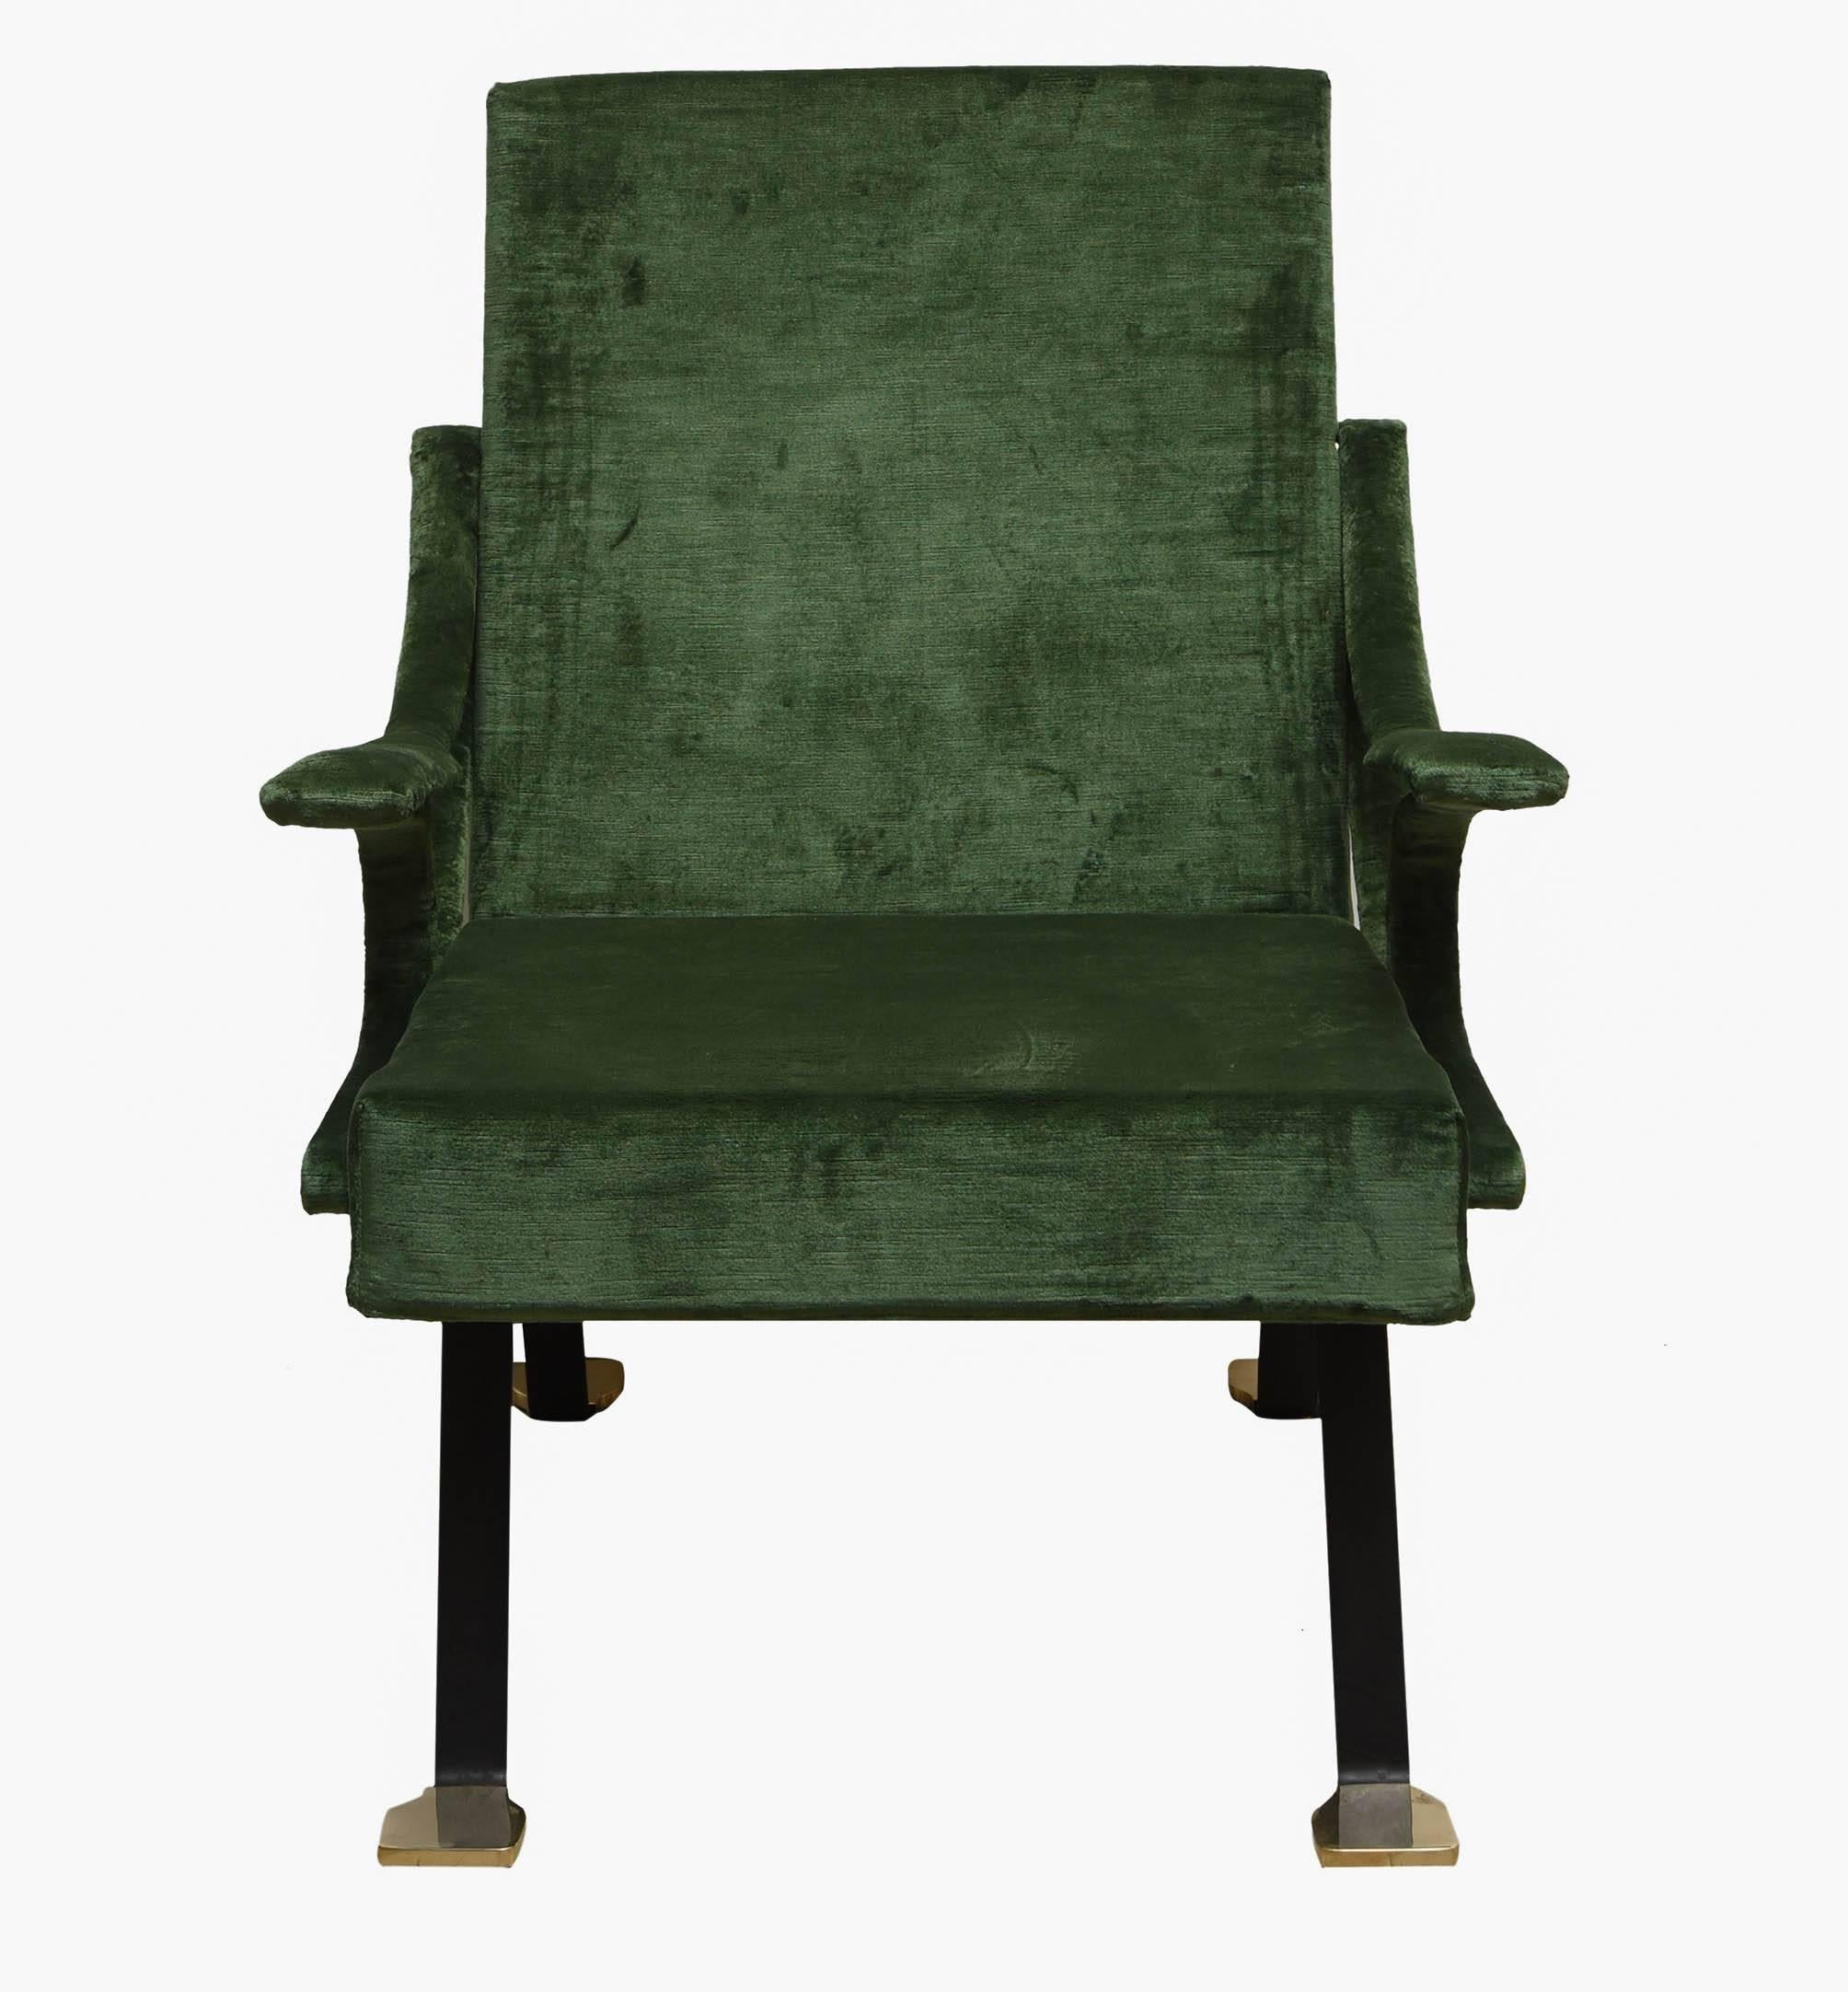 Digamma
Reclining armchair: black lacquered metal and brass structure. Green velvet upholstery.
Designed by Ignazio Gardella for Gavina,
Italy, 1957.
Measure: H cm 87 x L cm 85 x D cm 56.